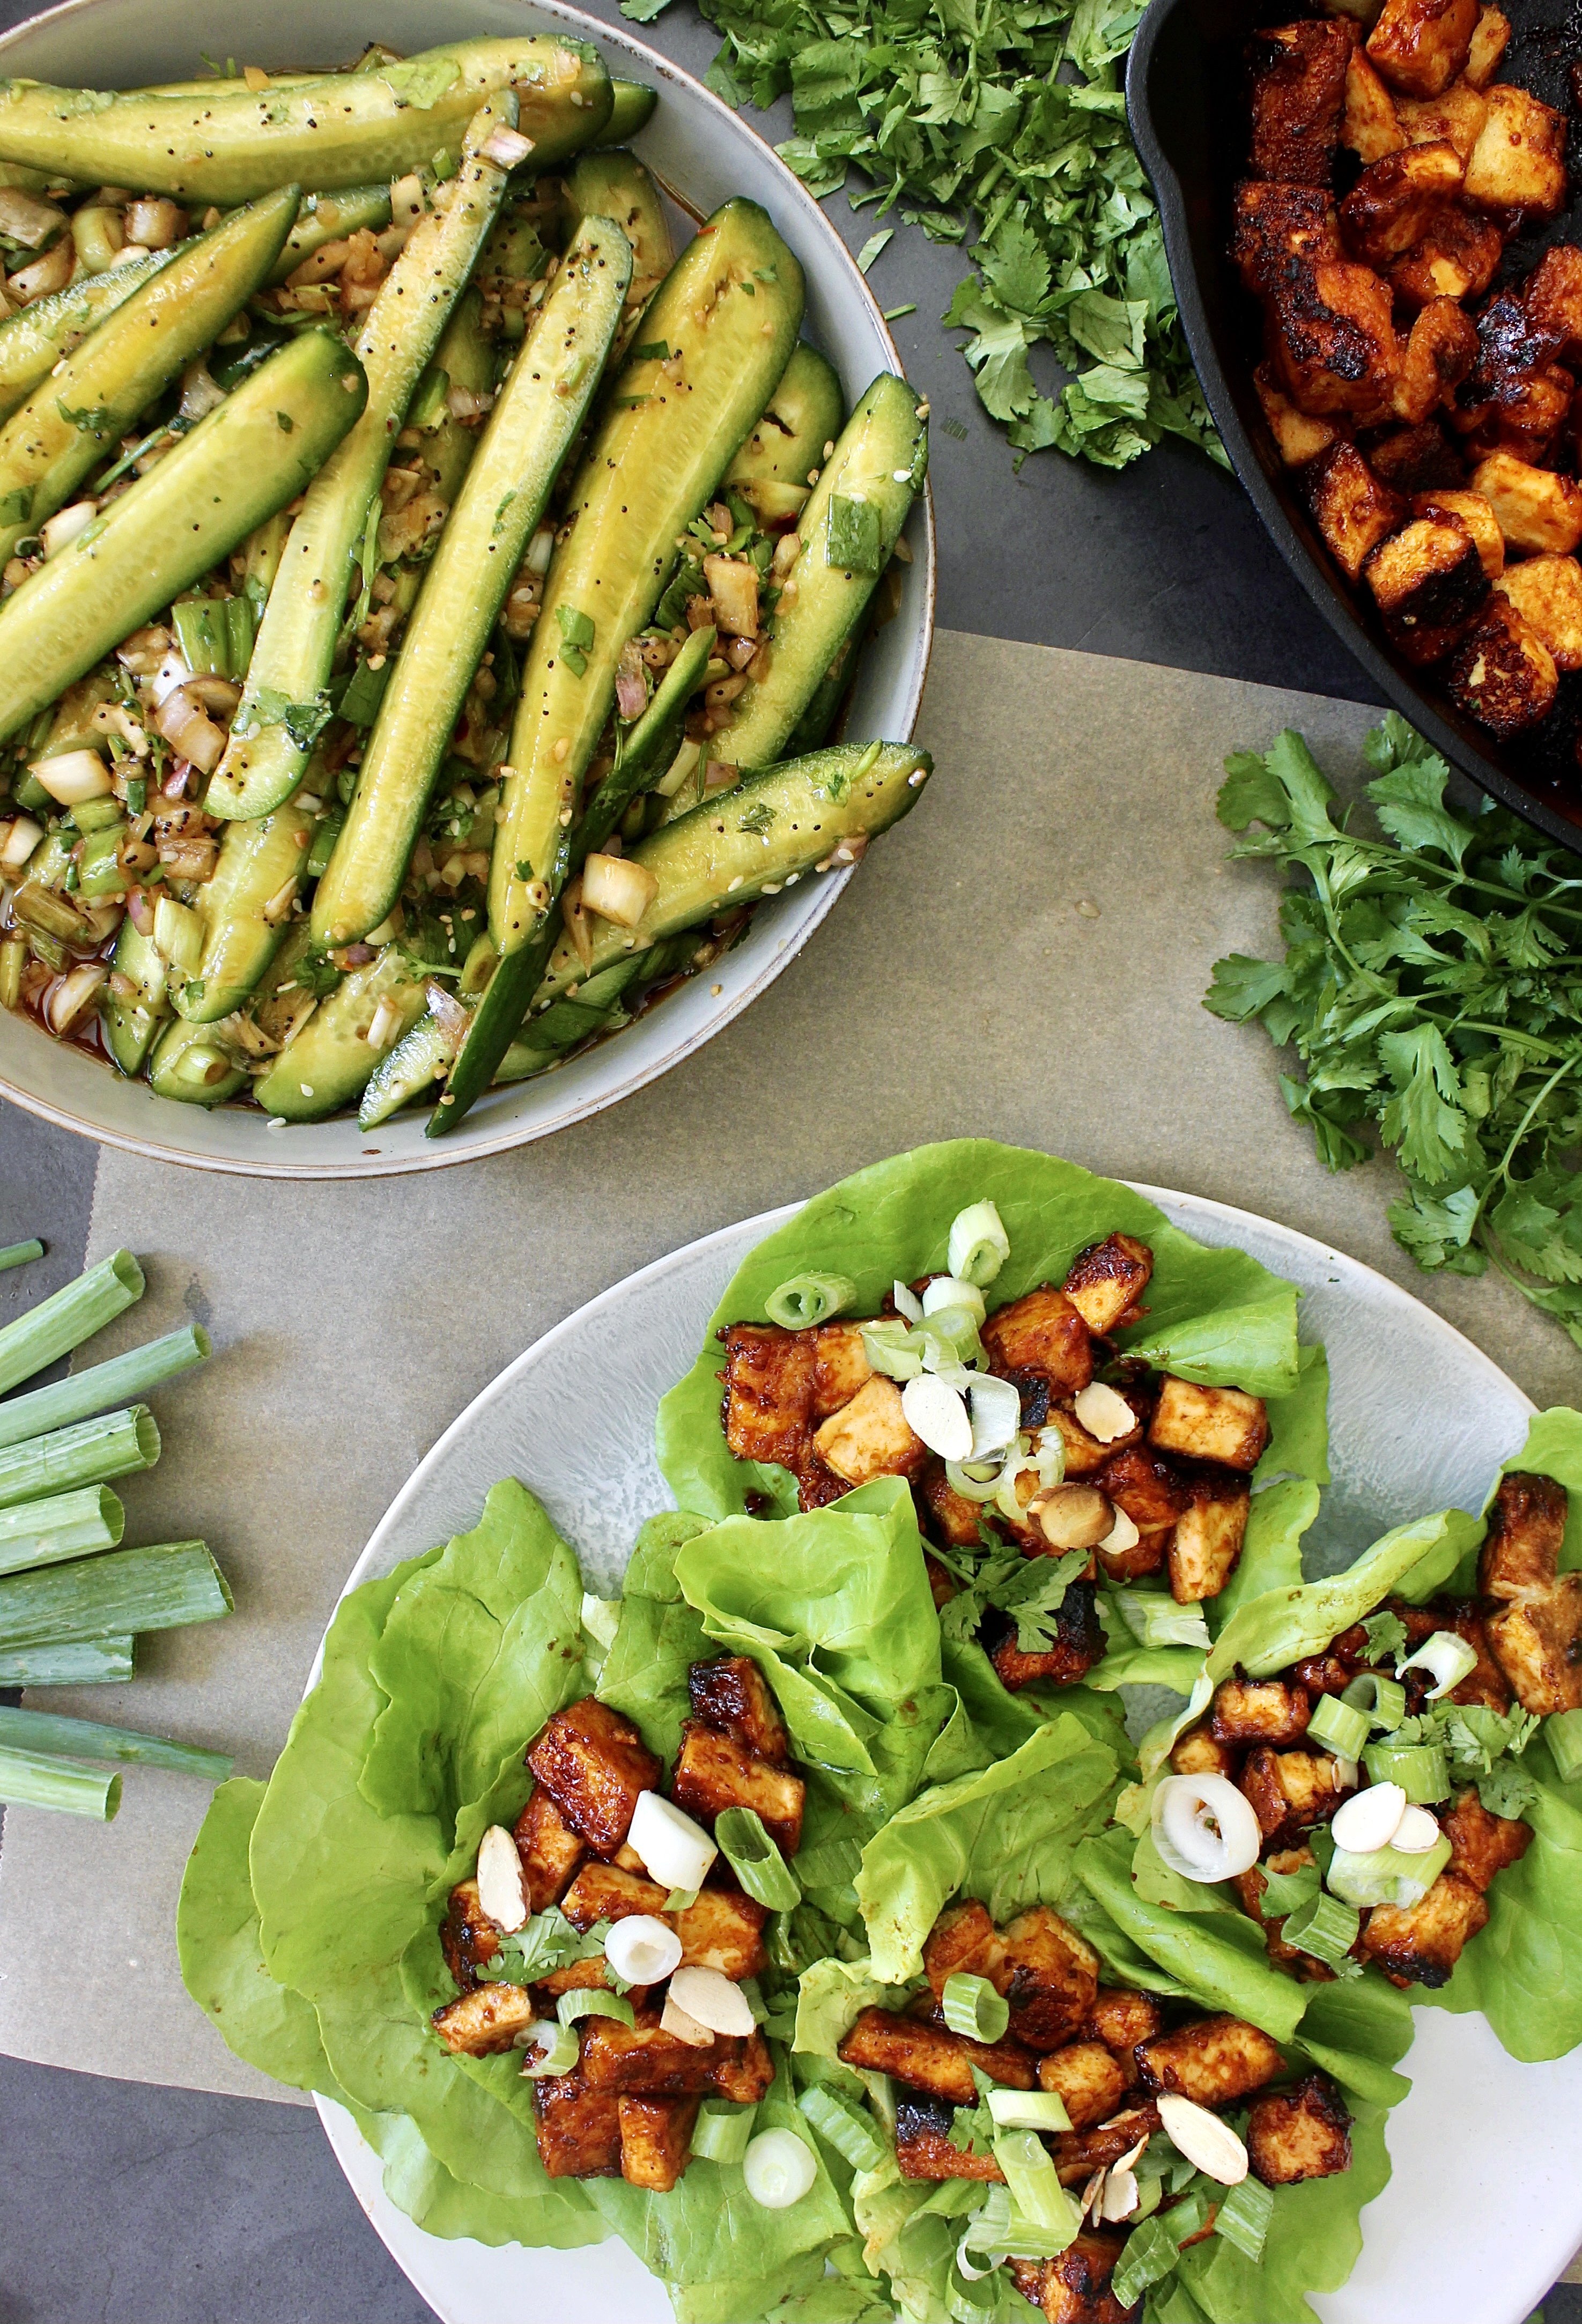 Crispy pan fried tofu tossed in a spicy Asian chili sauce and tucked into cooling butter lettuce: these Gochujang Tofu Lettuce Wraps are my all time fav!!